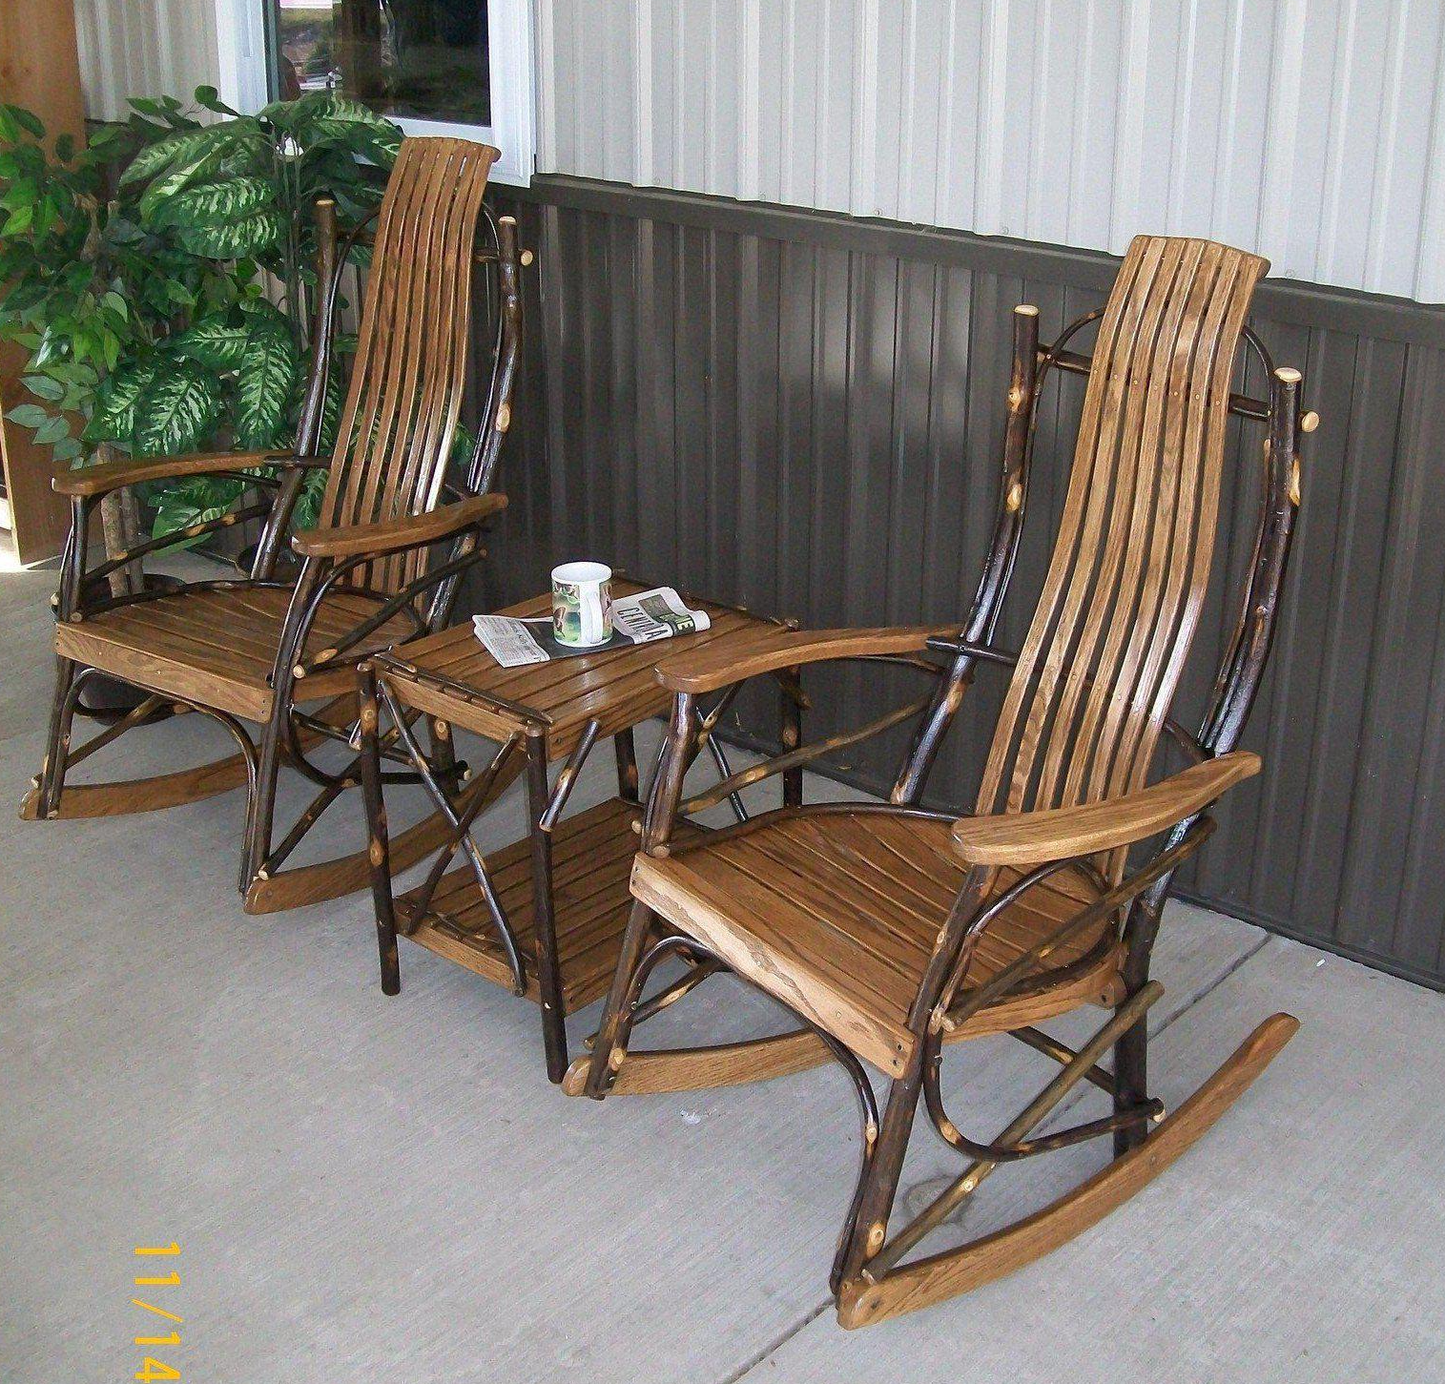 A&L Furniture Co. Amish Bentwood 7-Slat Hickory 3pc. Rocking Chair Set - LEAD TIME TO SHIP 10 BUSINESS DAYS